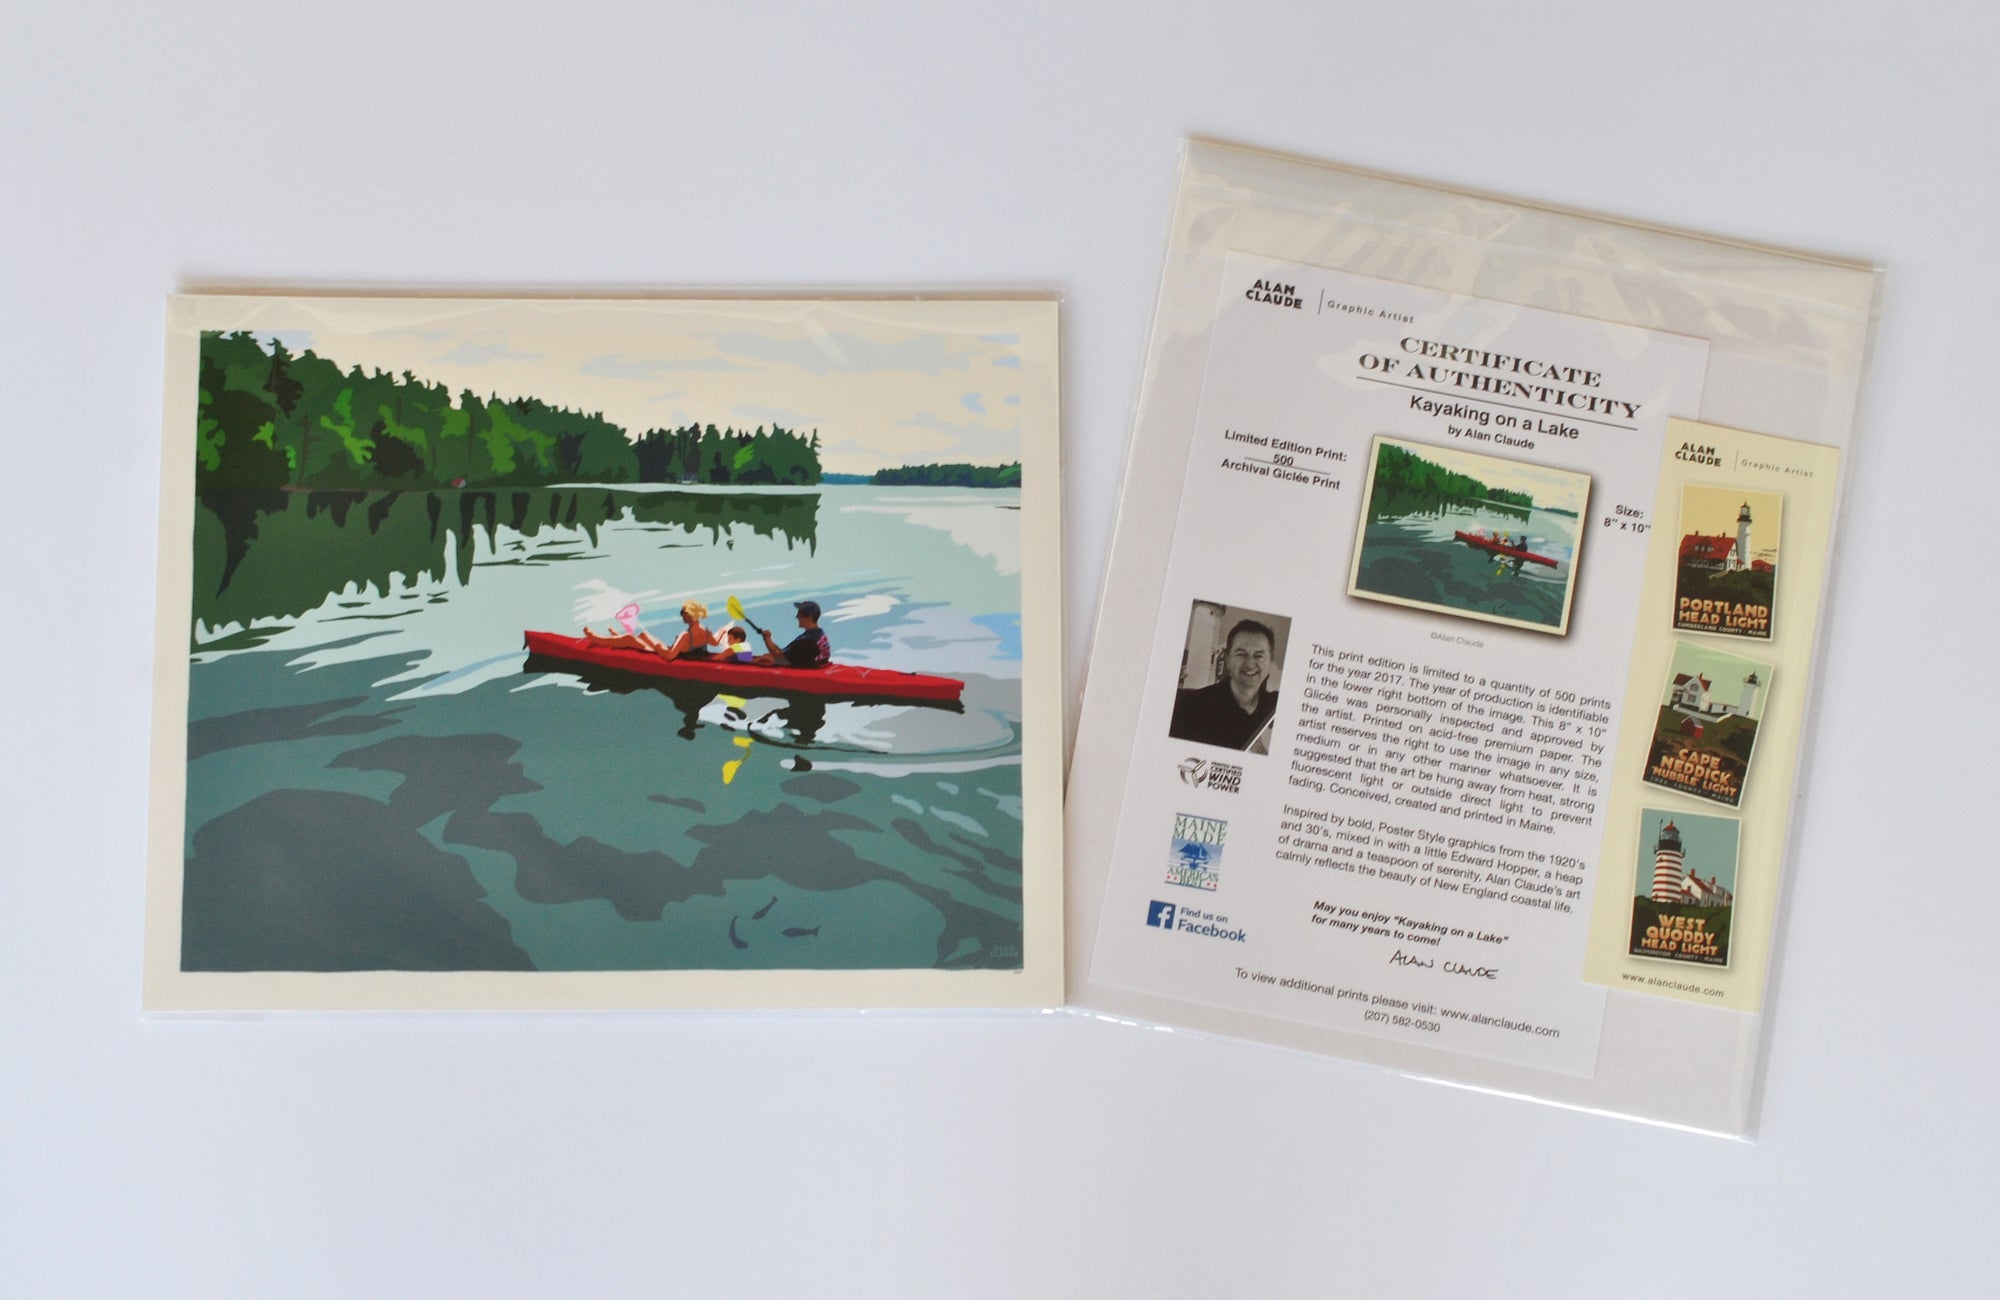 Kayaking on a Lake Art Print 8" x 10" Wall Poster By Alan Claude - Maine